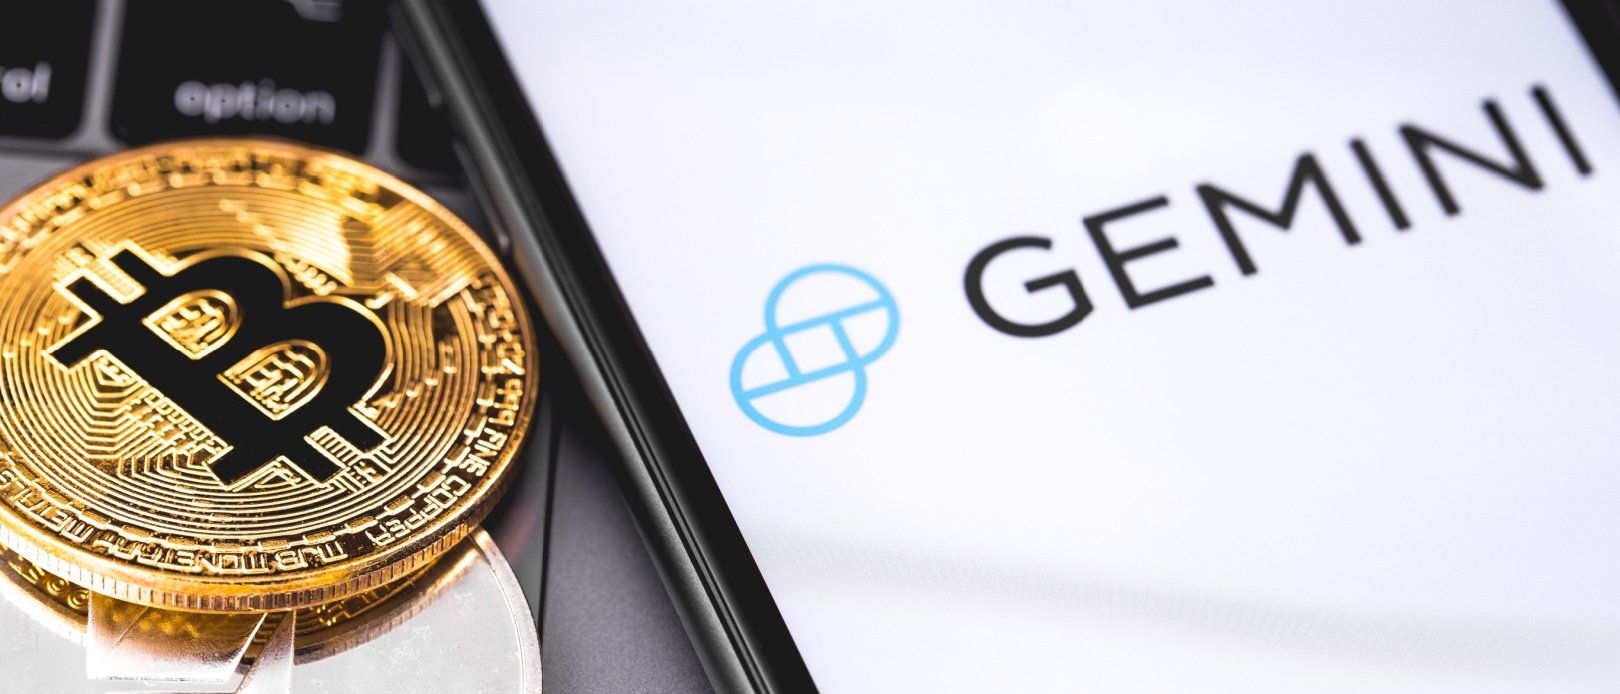 Gemini Cryptocurrency Exchange Stock Photos and Pictures - Images | Shutterstock